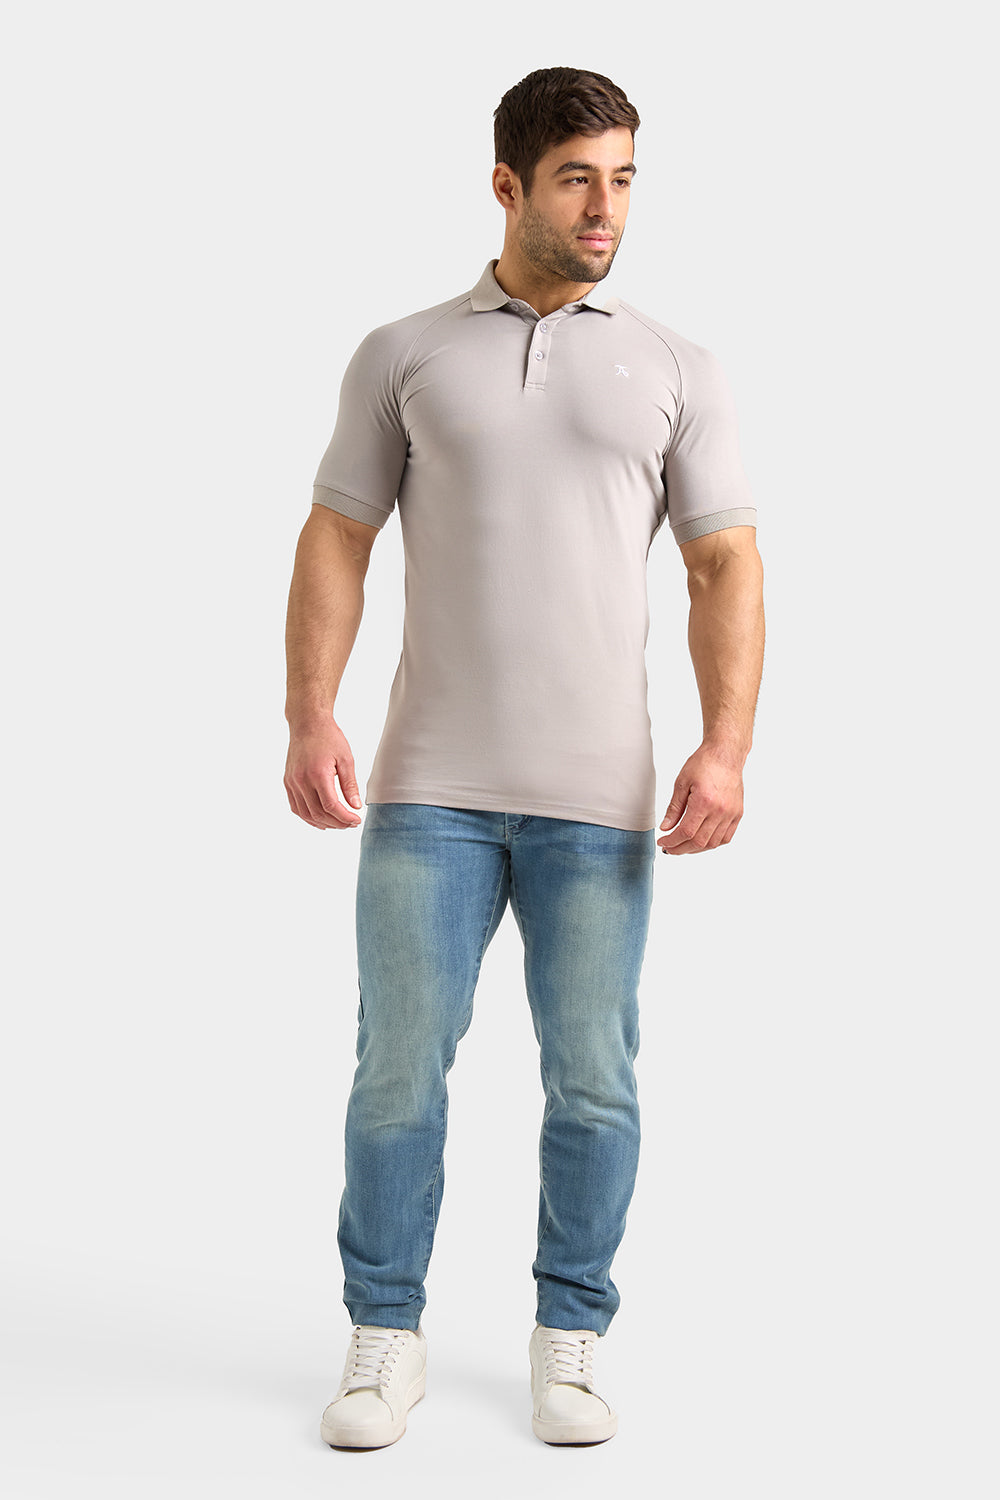 Muscle Fit Polo Shirt in Concrete Grey - TAILORED ATHLETE - ROW